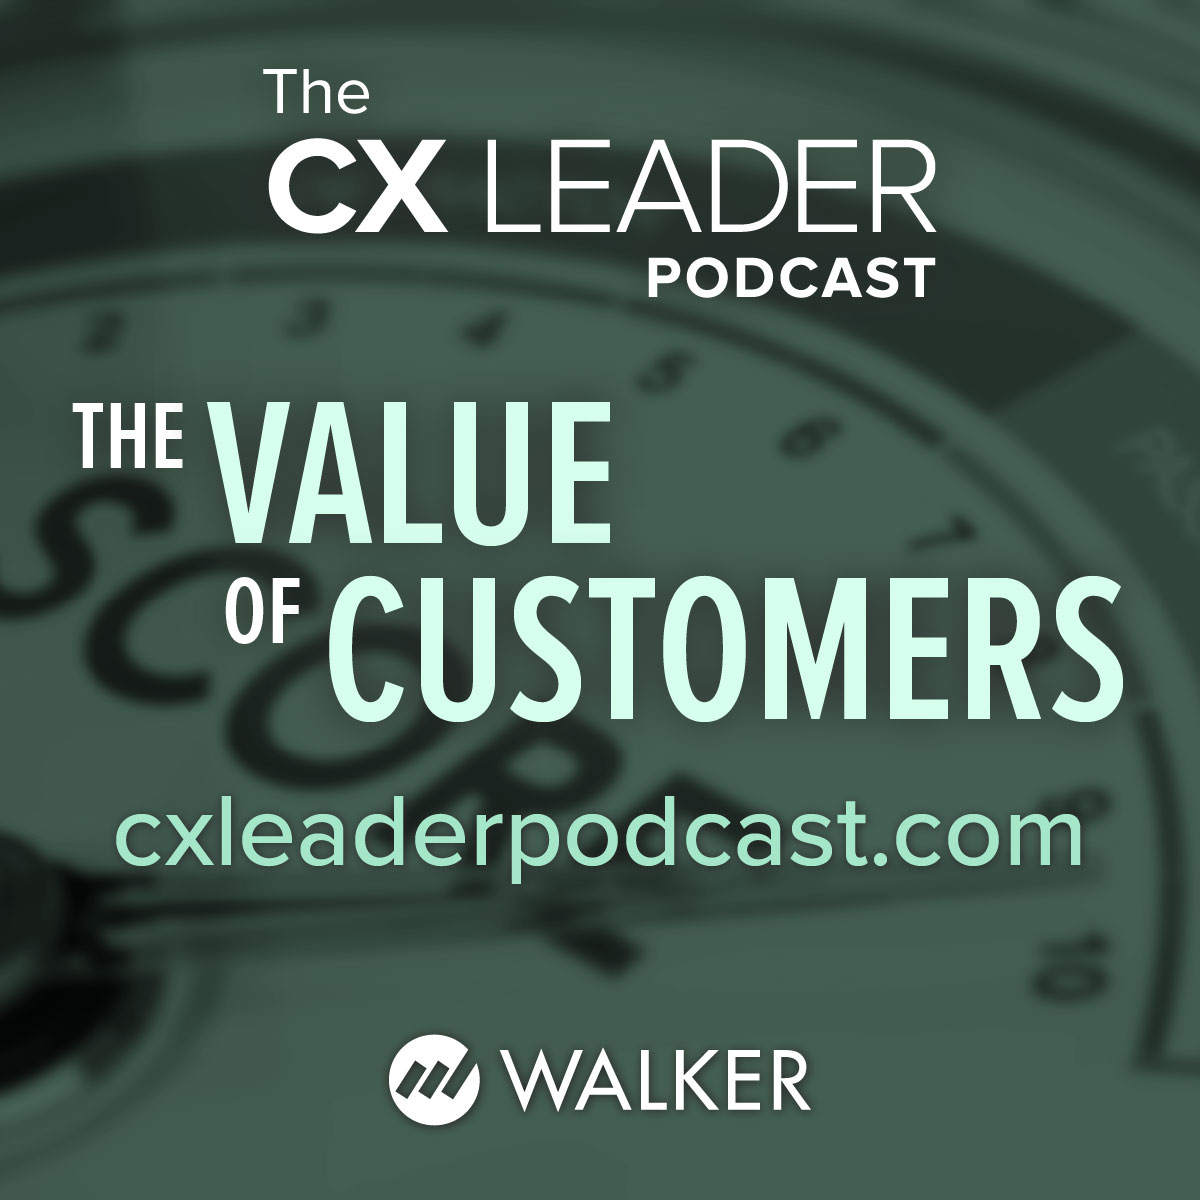 The Value of Customers, part 2